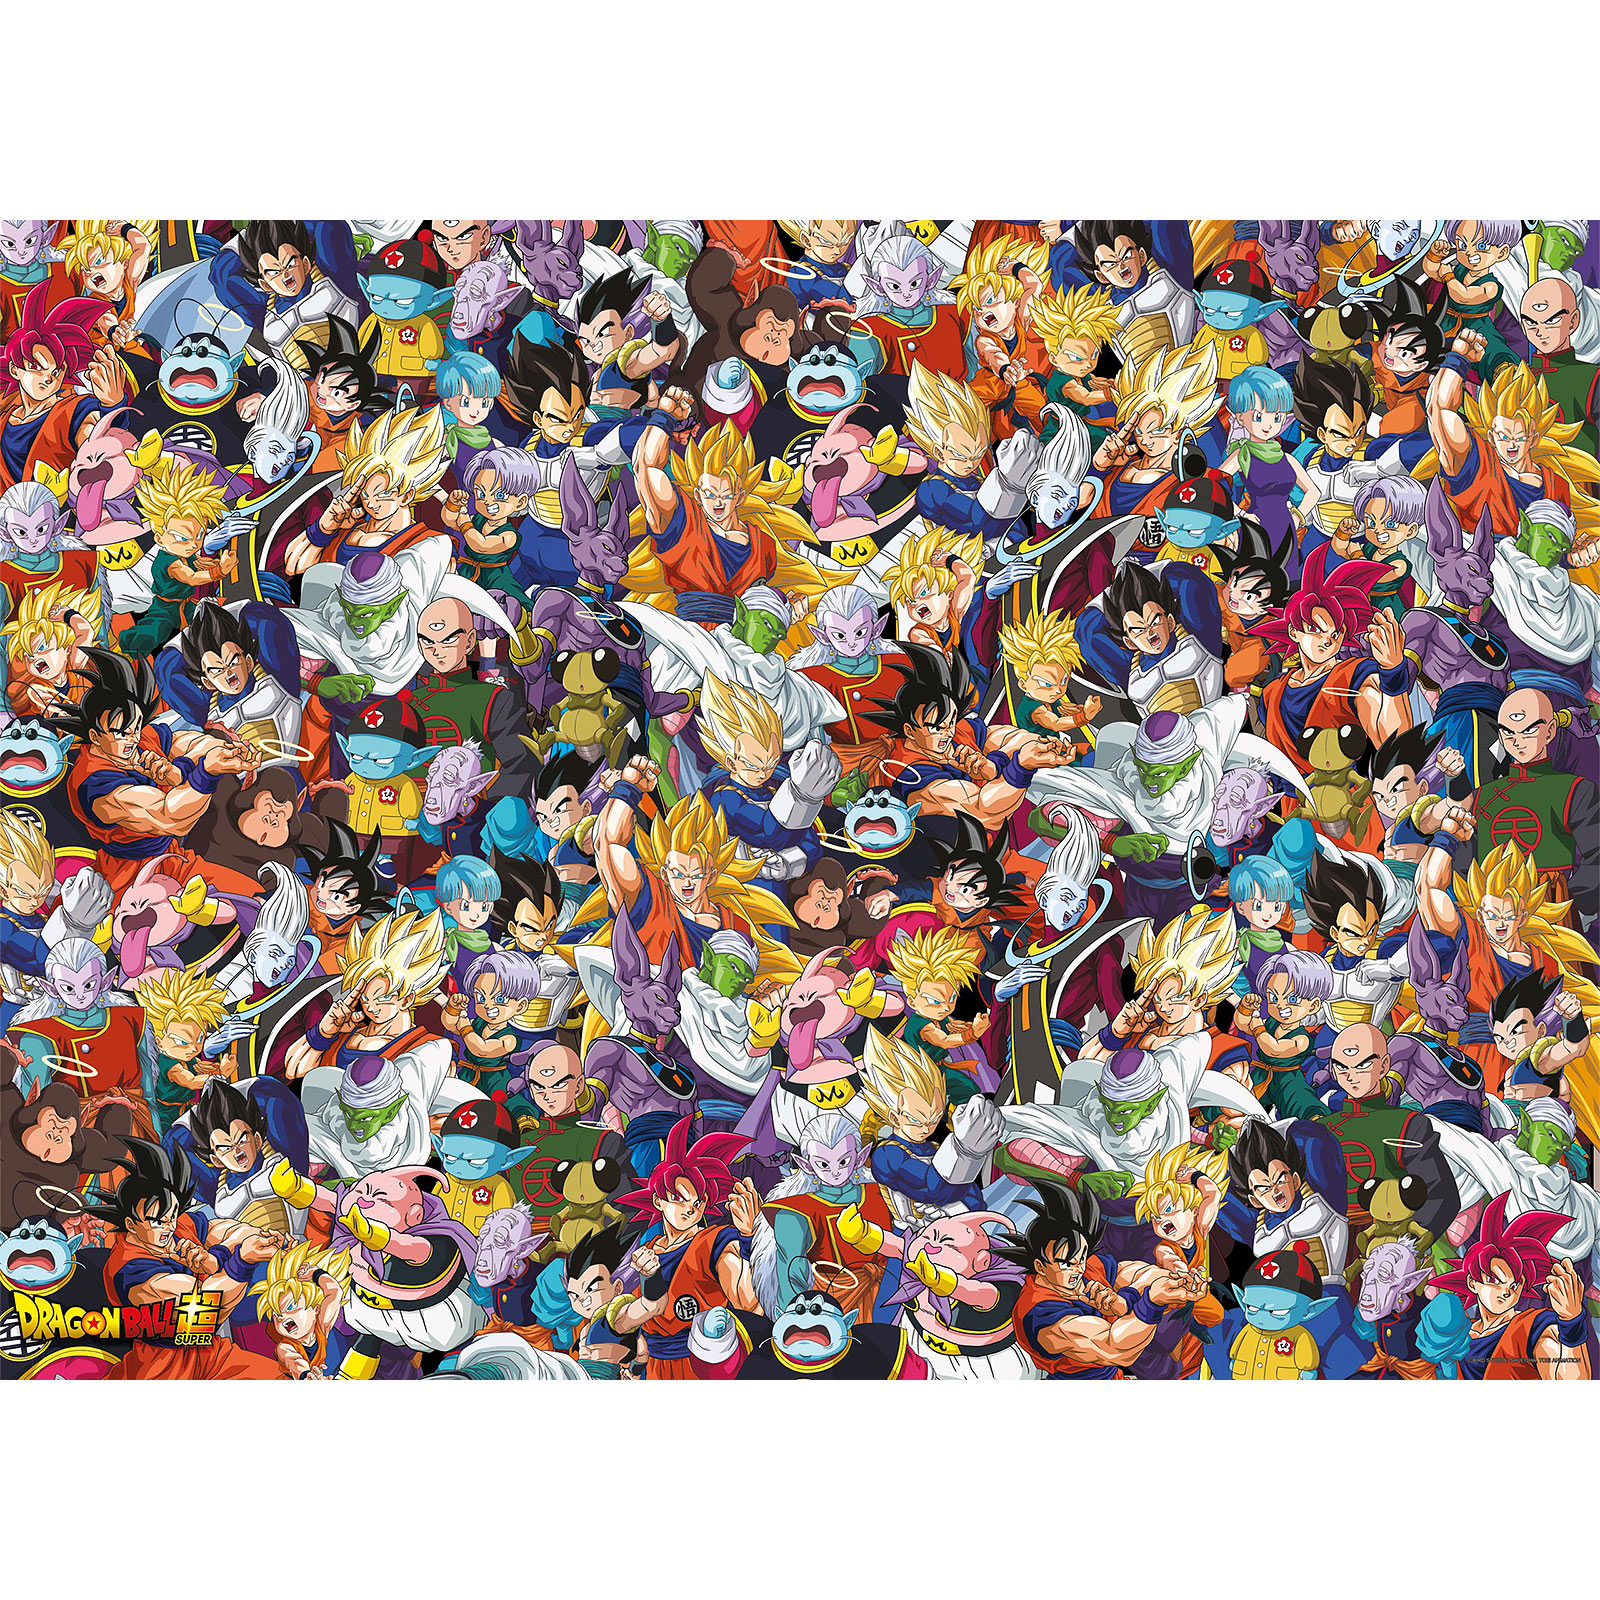 Dragon Ball - Impossible Characters Puzzle